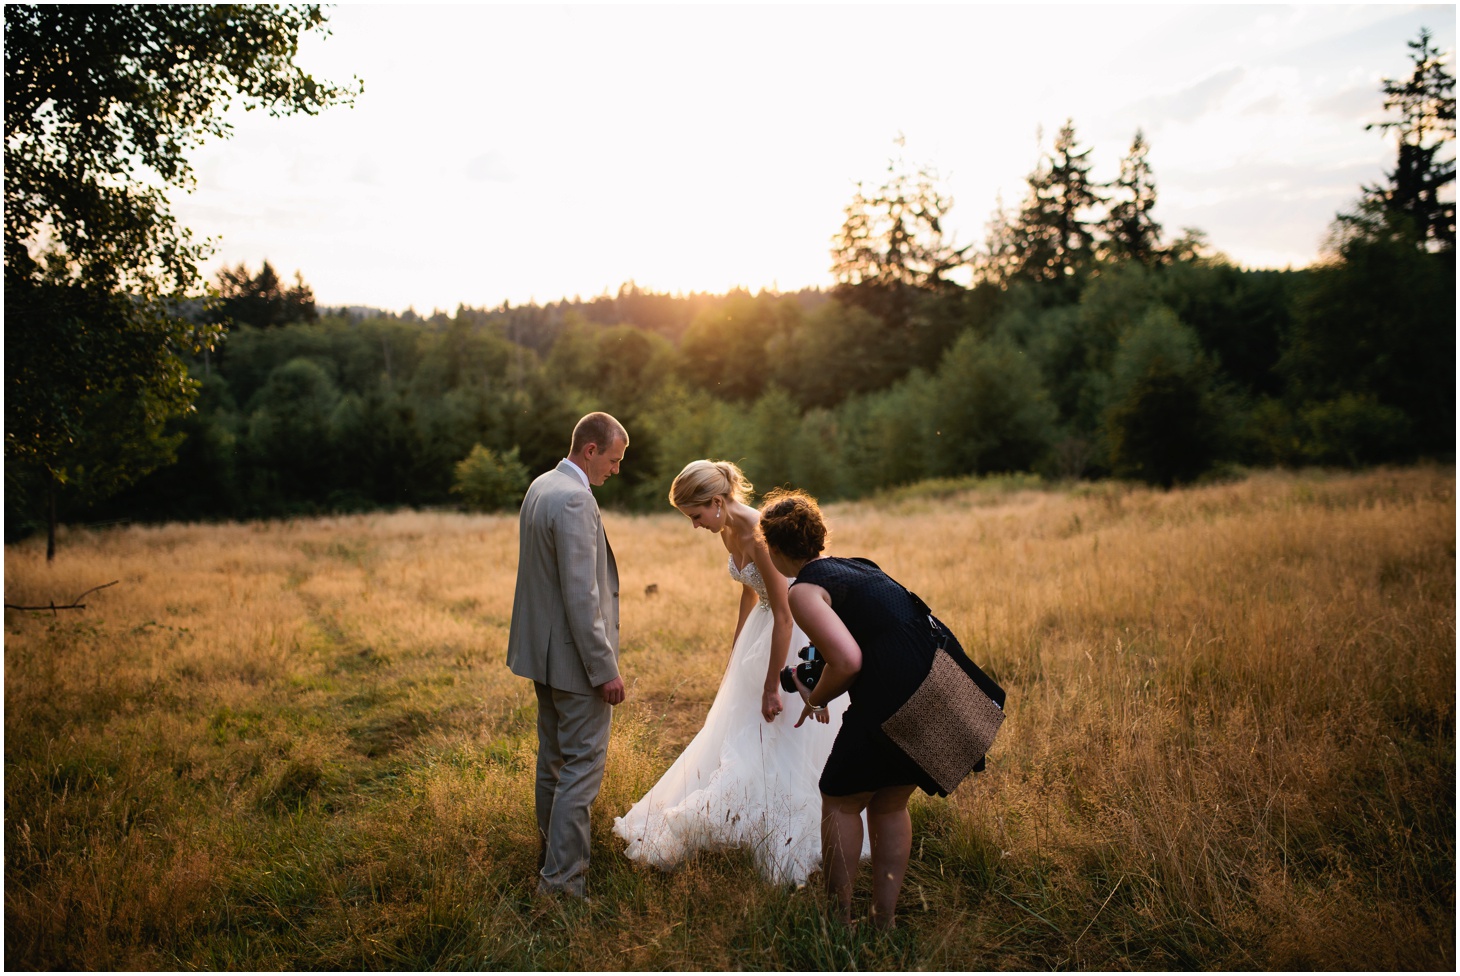 Behind the Scenes in 2014 - Weddings by Sarah Bradshaw Photography_0130